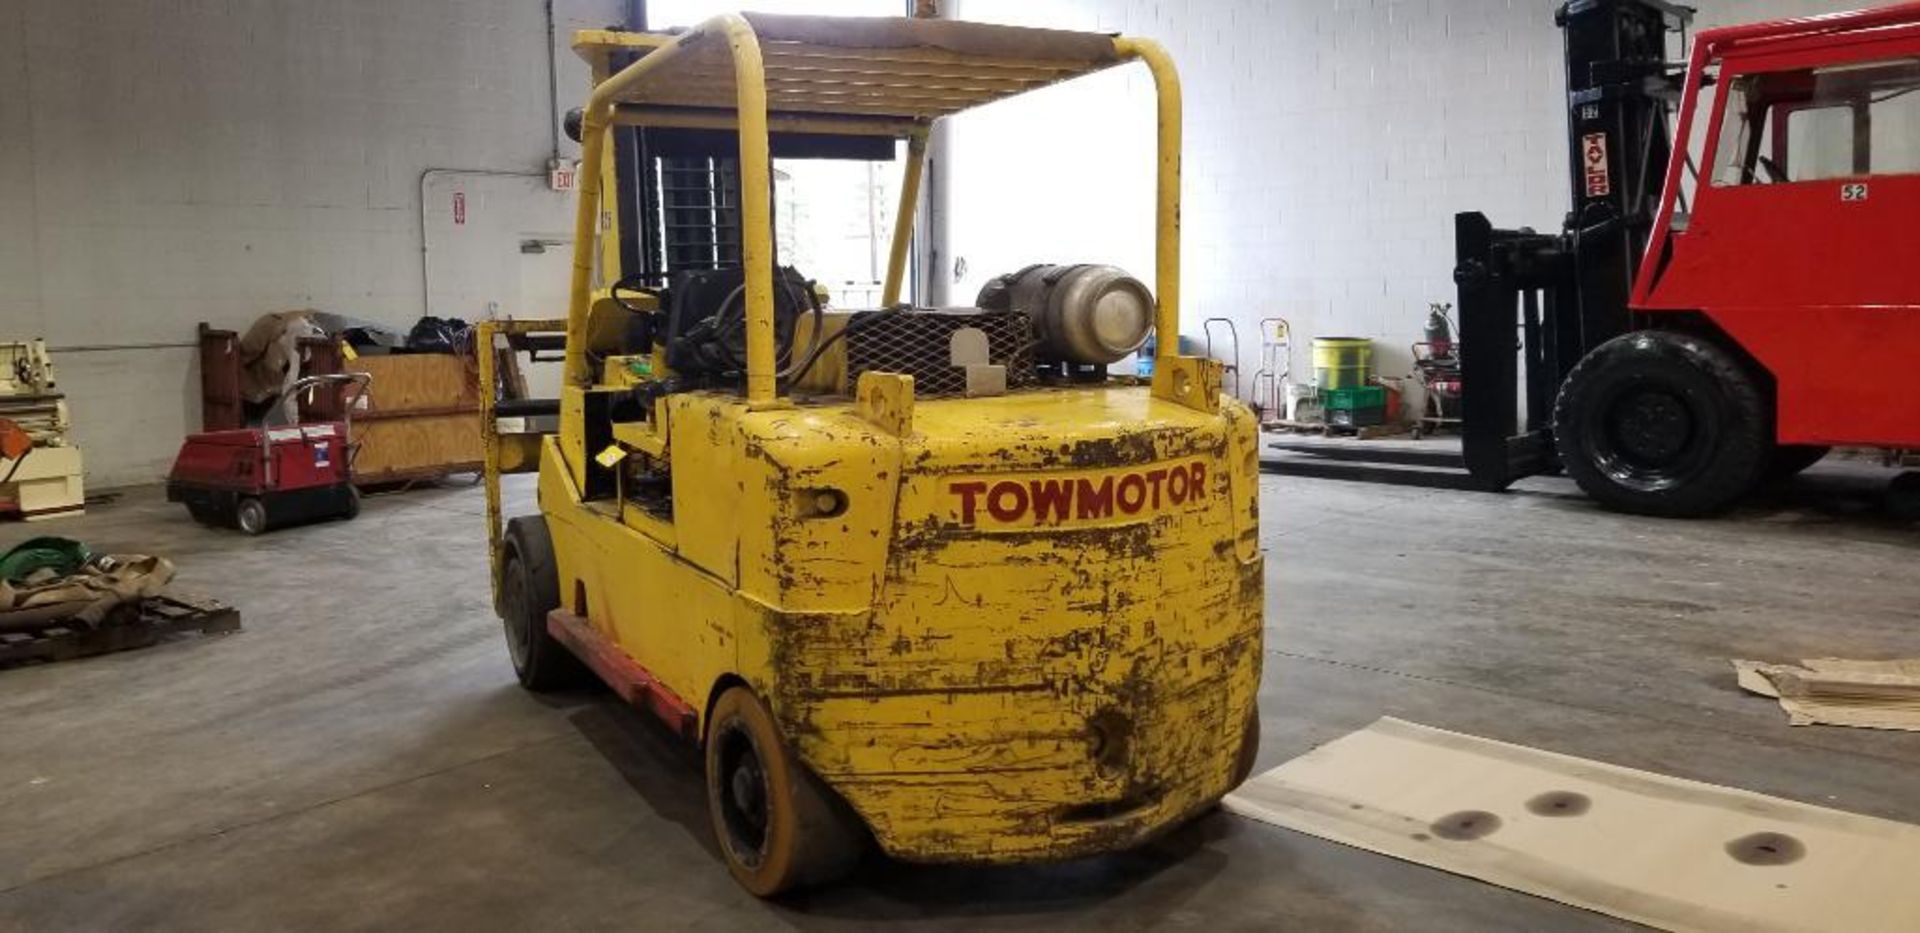 Towmotor Forklift Truck, Model 950SG25030, S/N 950S650007, LPG, 25,000 LB. Capacity, 2-Stage Mast, 1 - Image 4 of 9